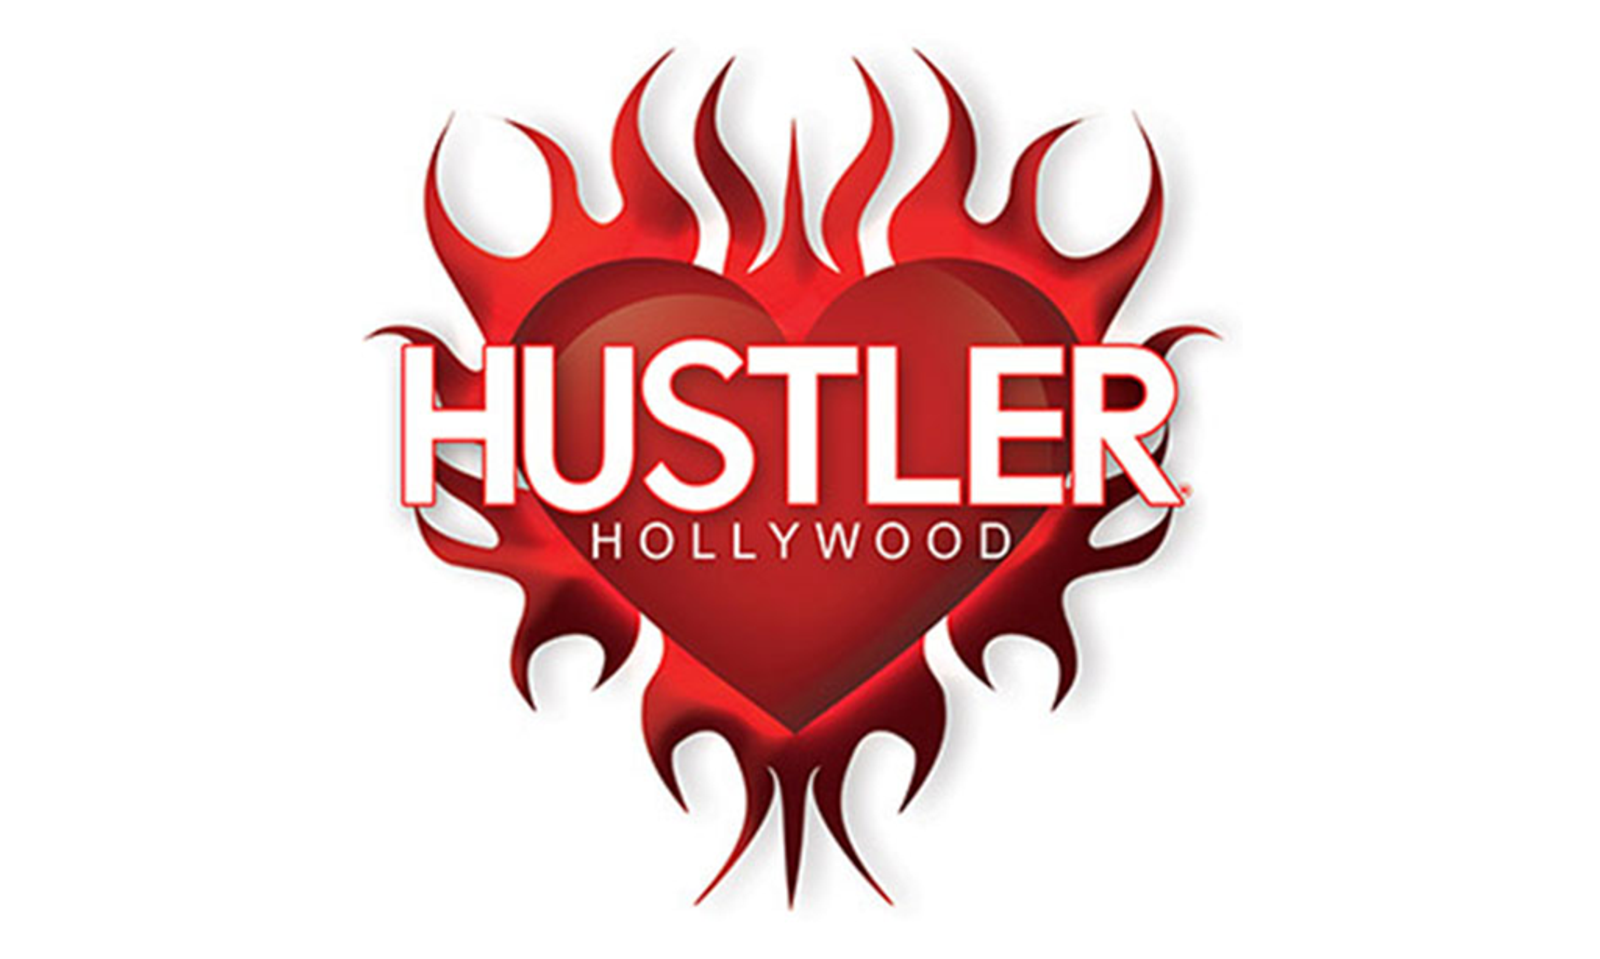 New Hustler Hollywood Is Now Open for Business in Fort Worth